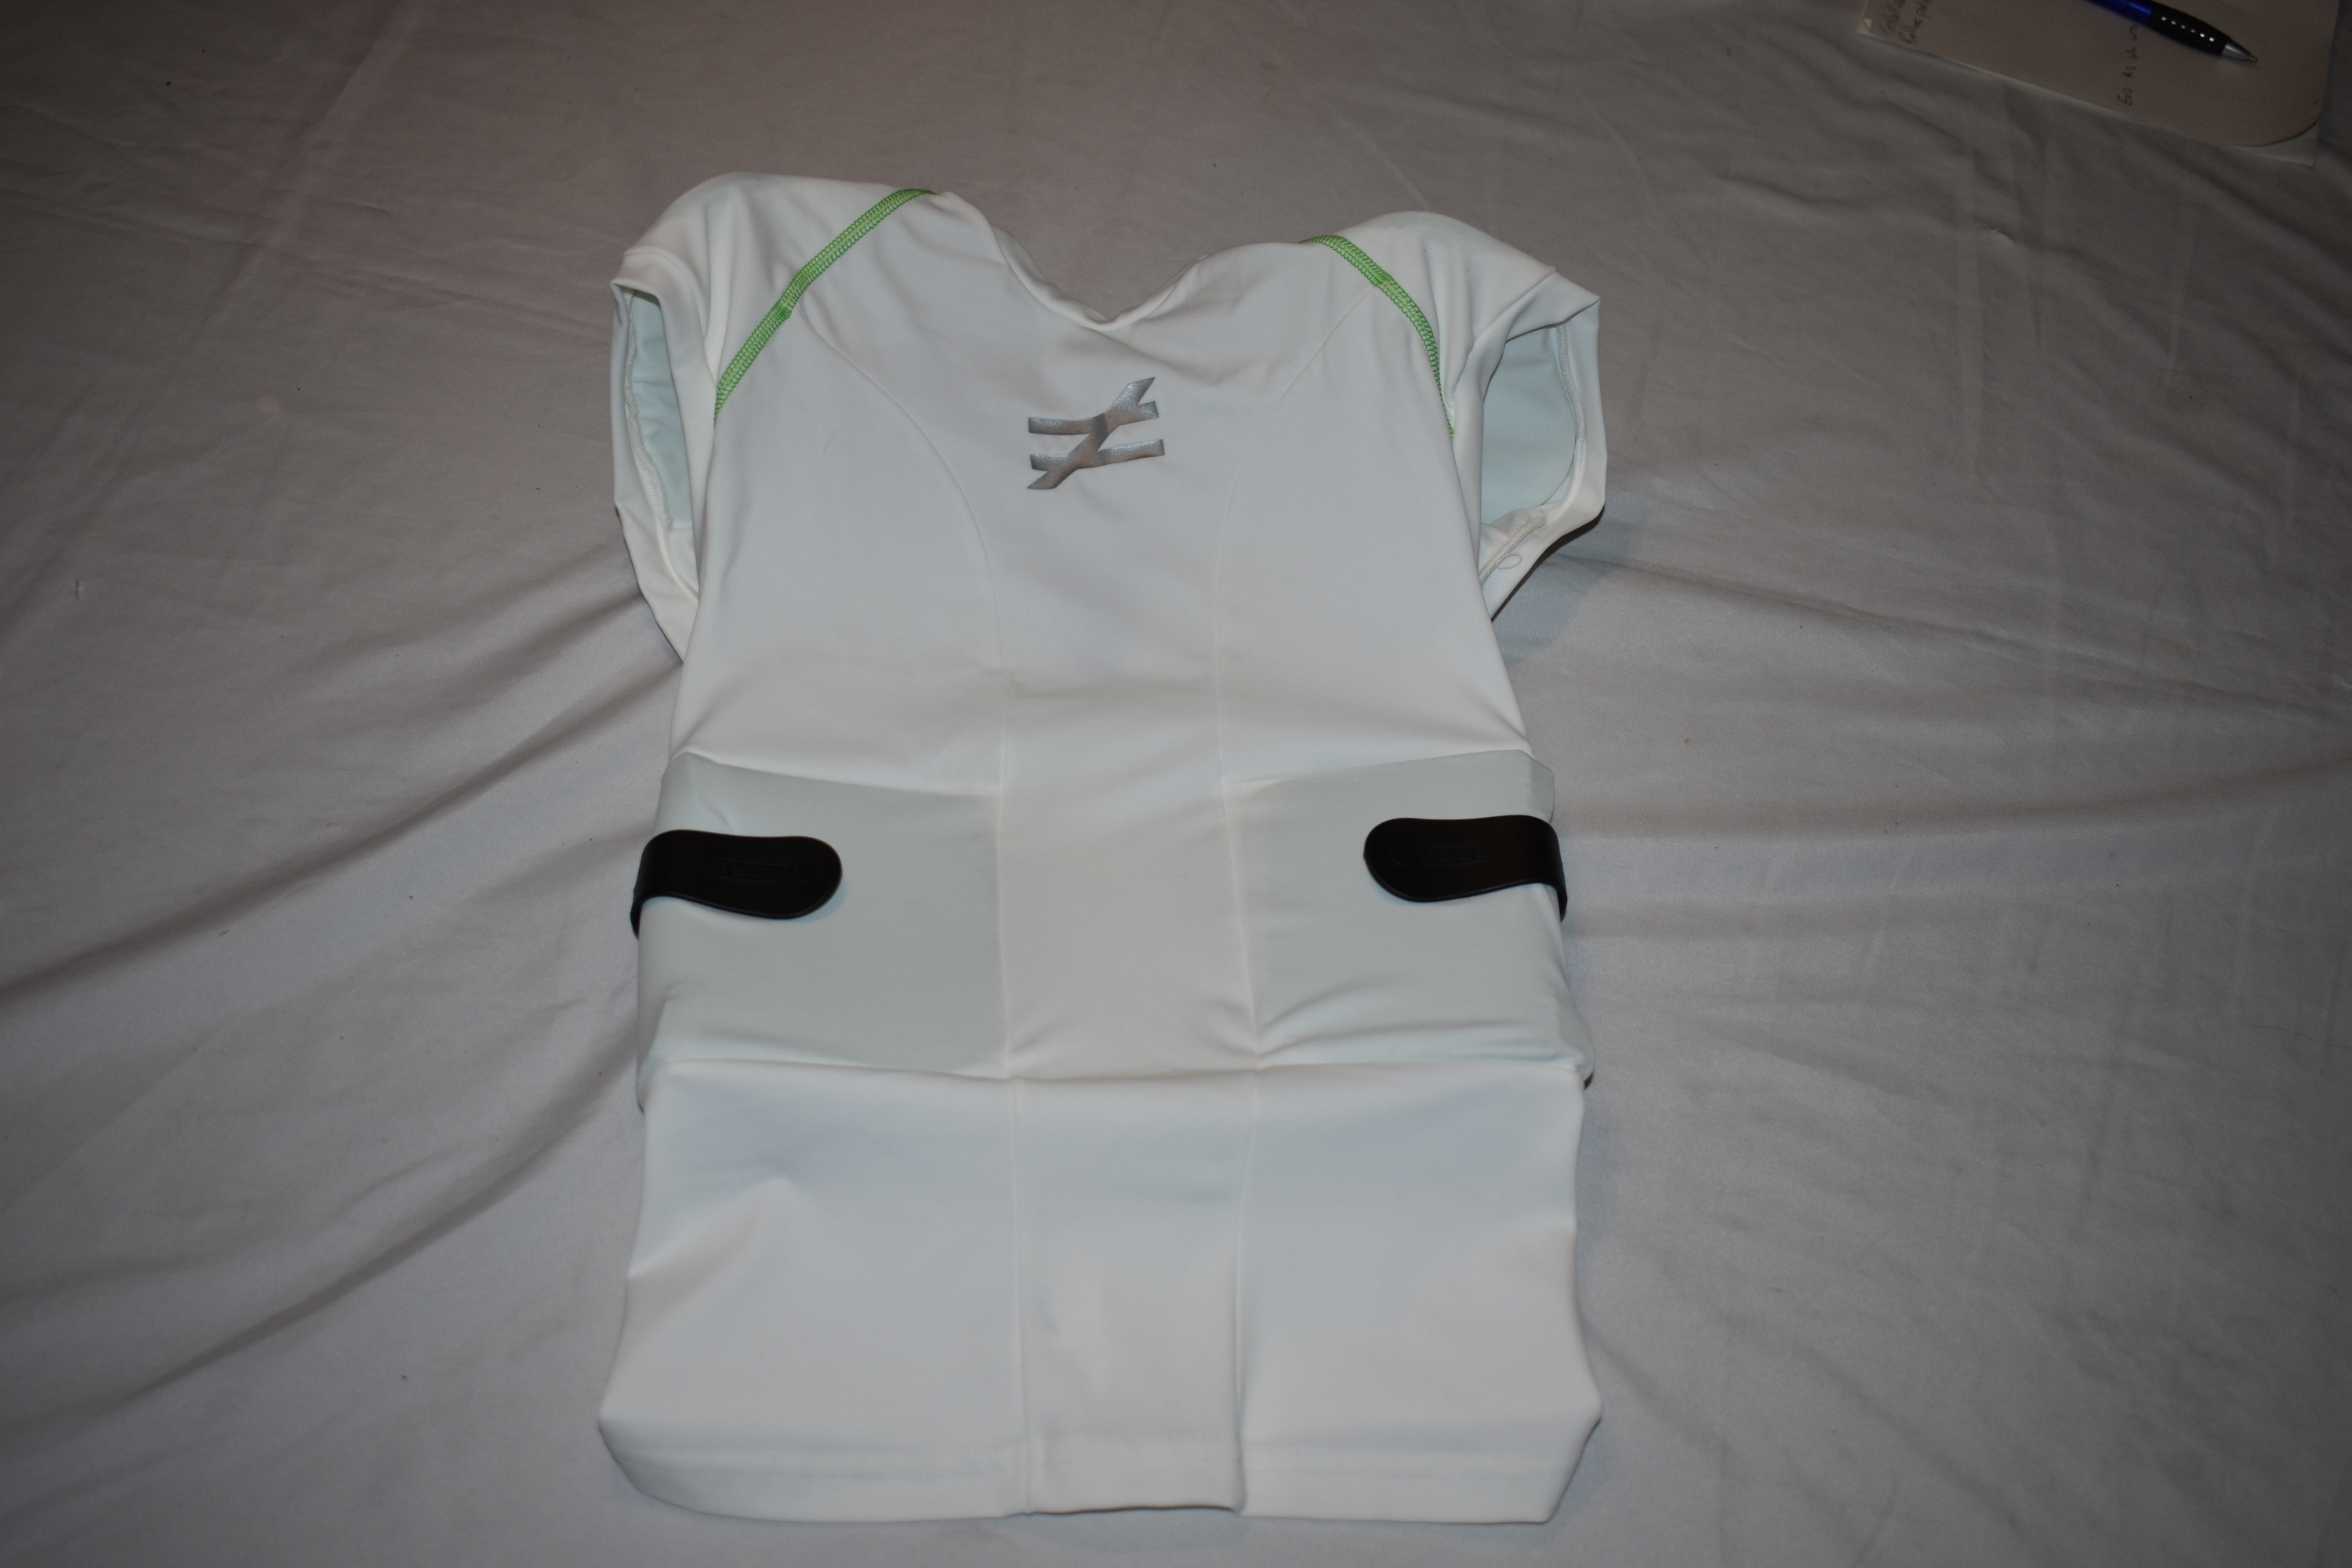 Unequal Invincible Padded Rib/Shoulder Protection Shirt, White, Youth Small